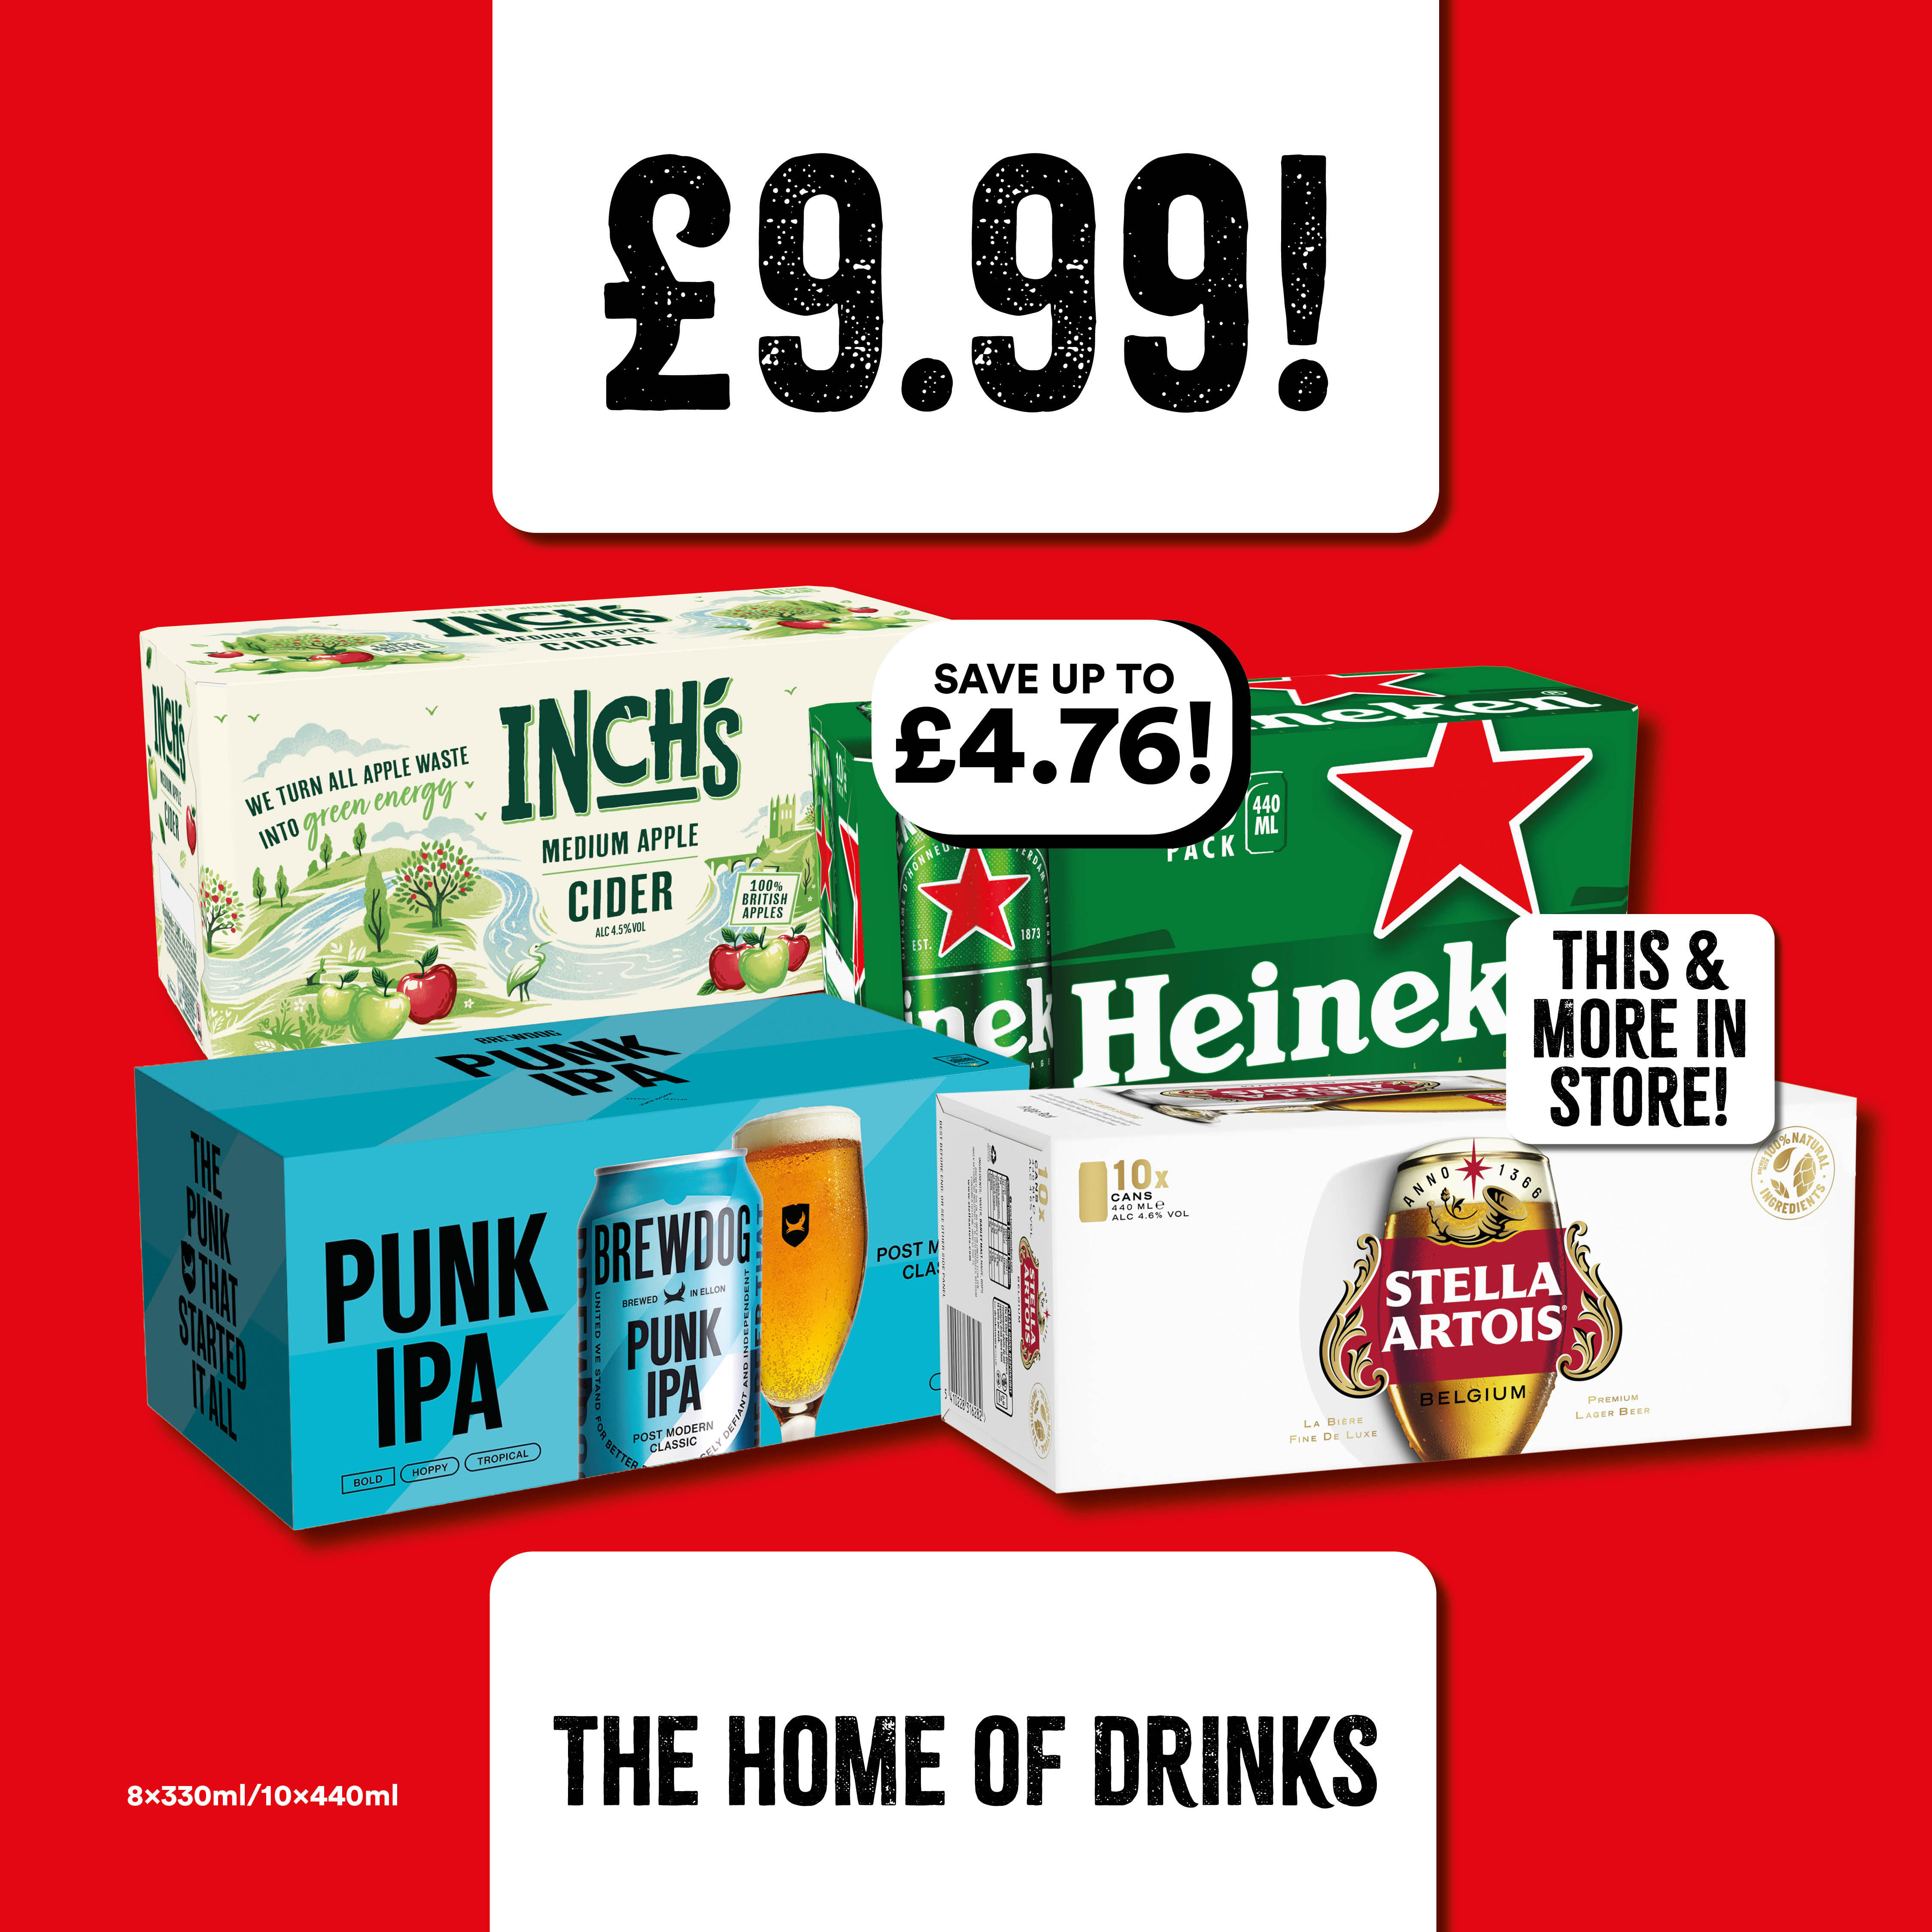 Beers 8 x 330ml/10 x 440ml 
Only £9.99 Bargain Booze Holmes Chapel 01477 537193